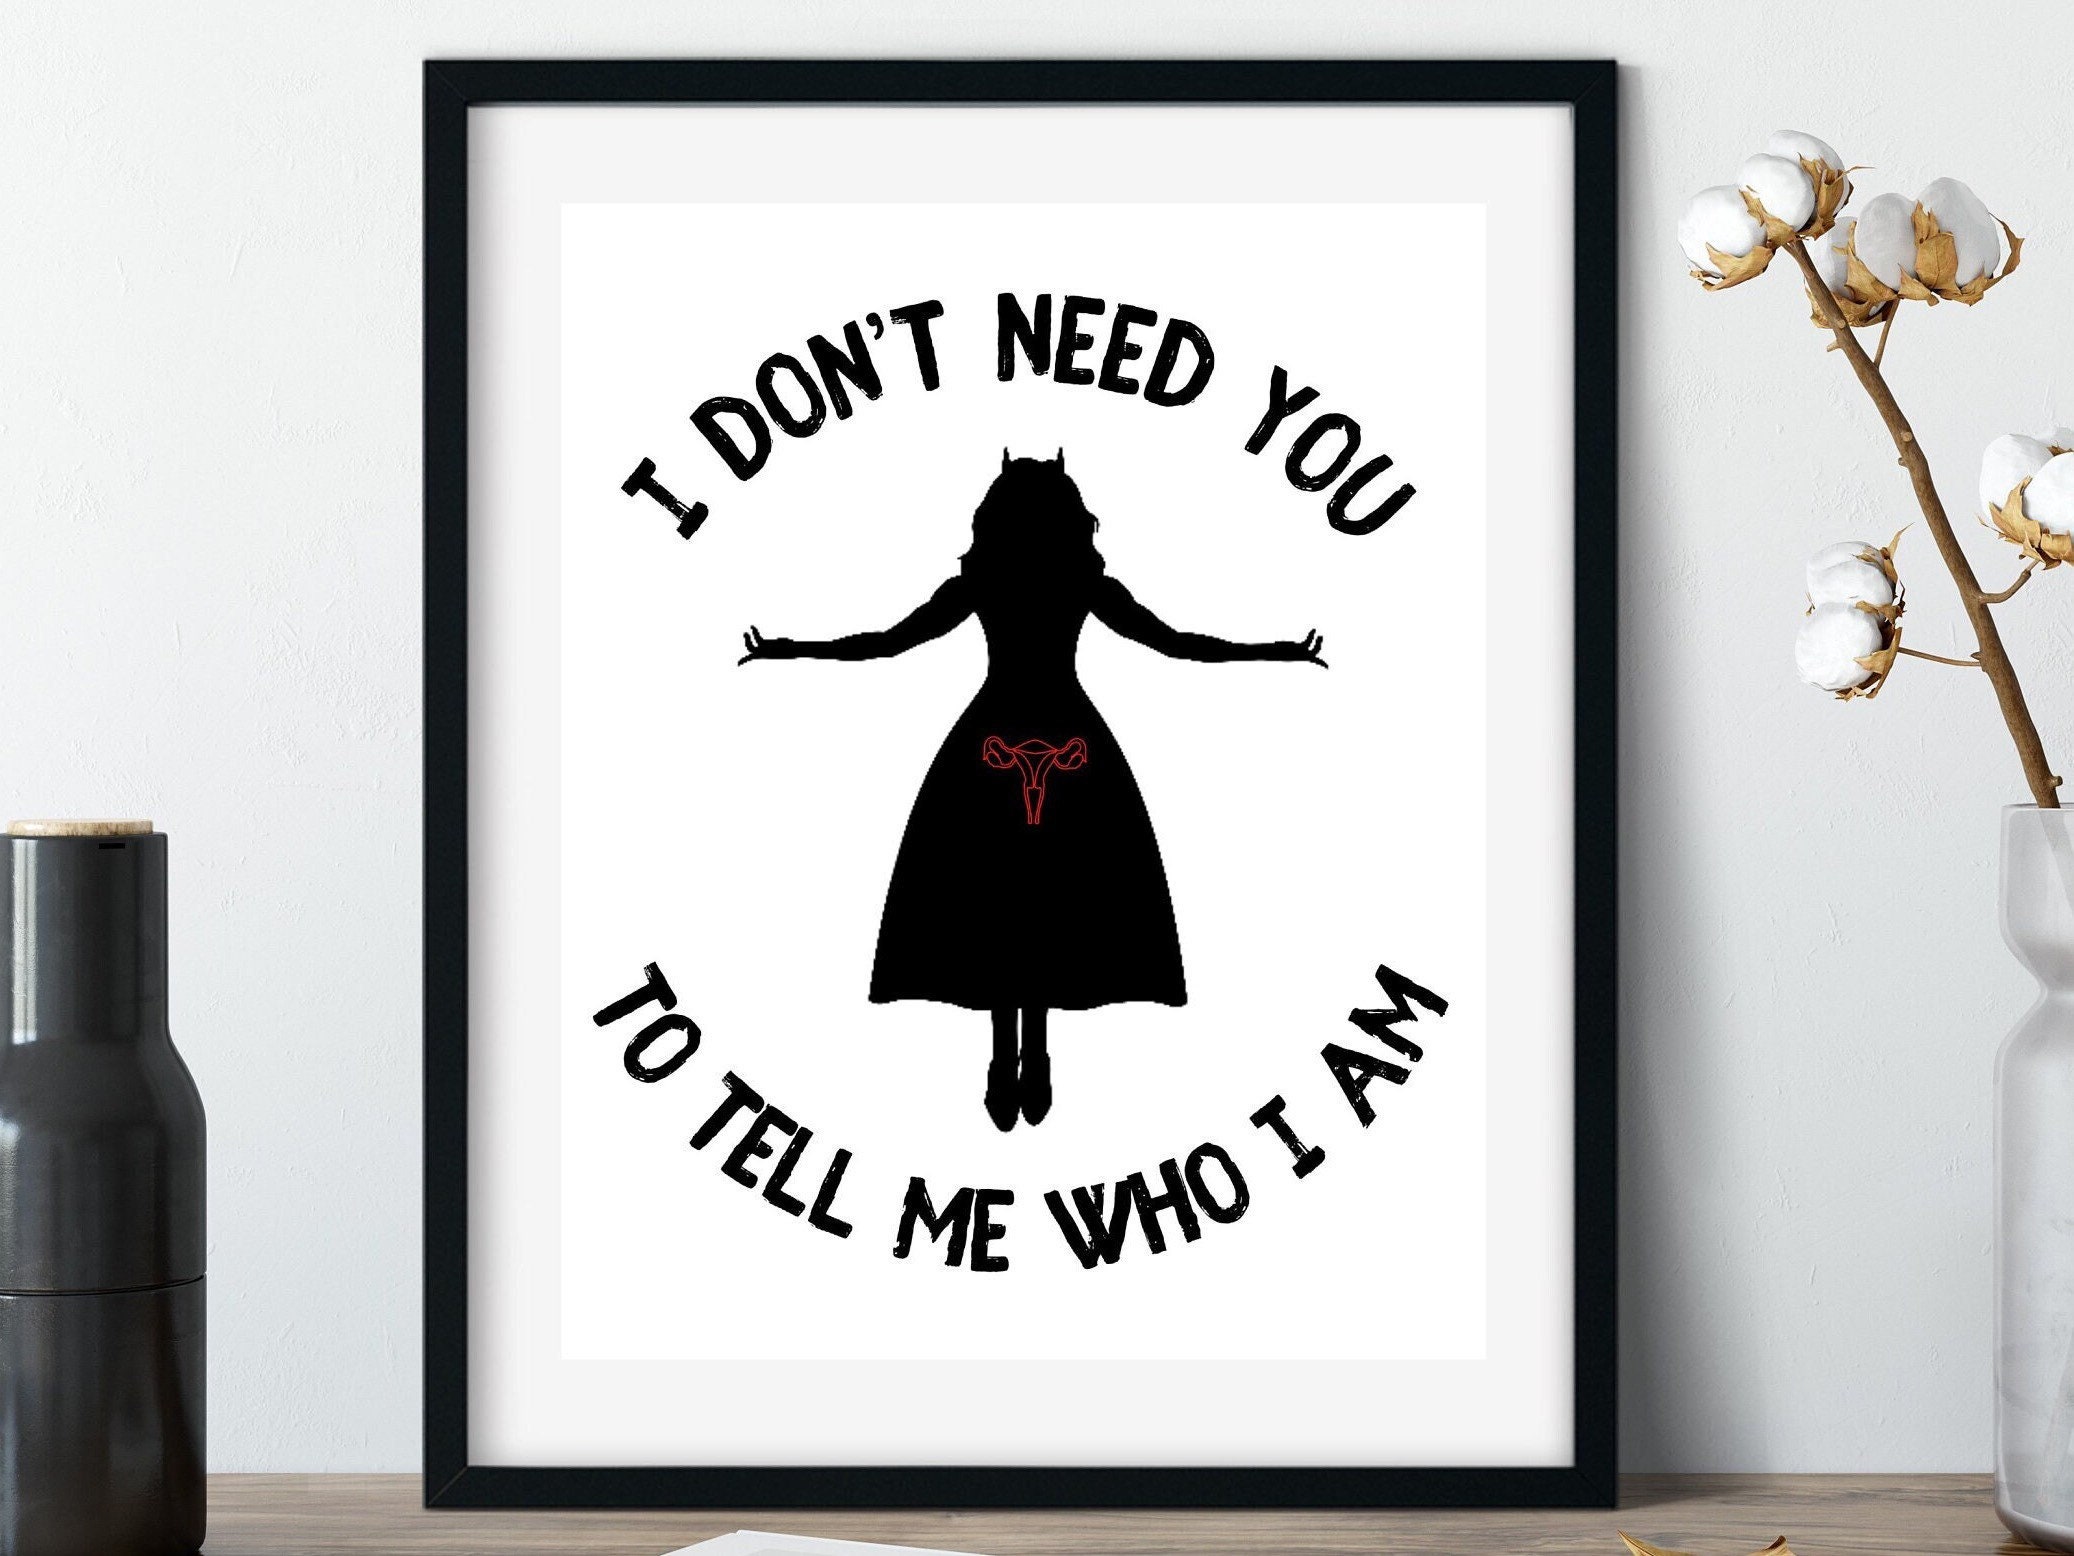 Scarlet Witch Women's Rights Printable, Roe v Wade Poster, Feminist Print, My Body My Choice, Pro Choice